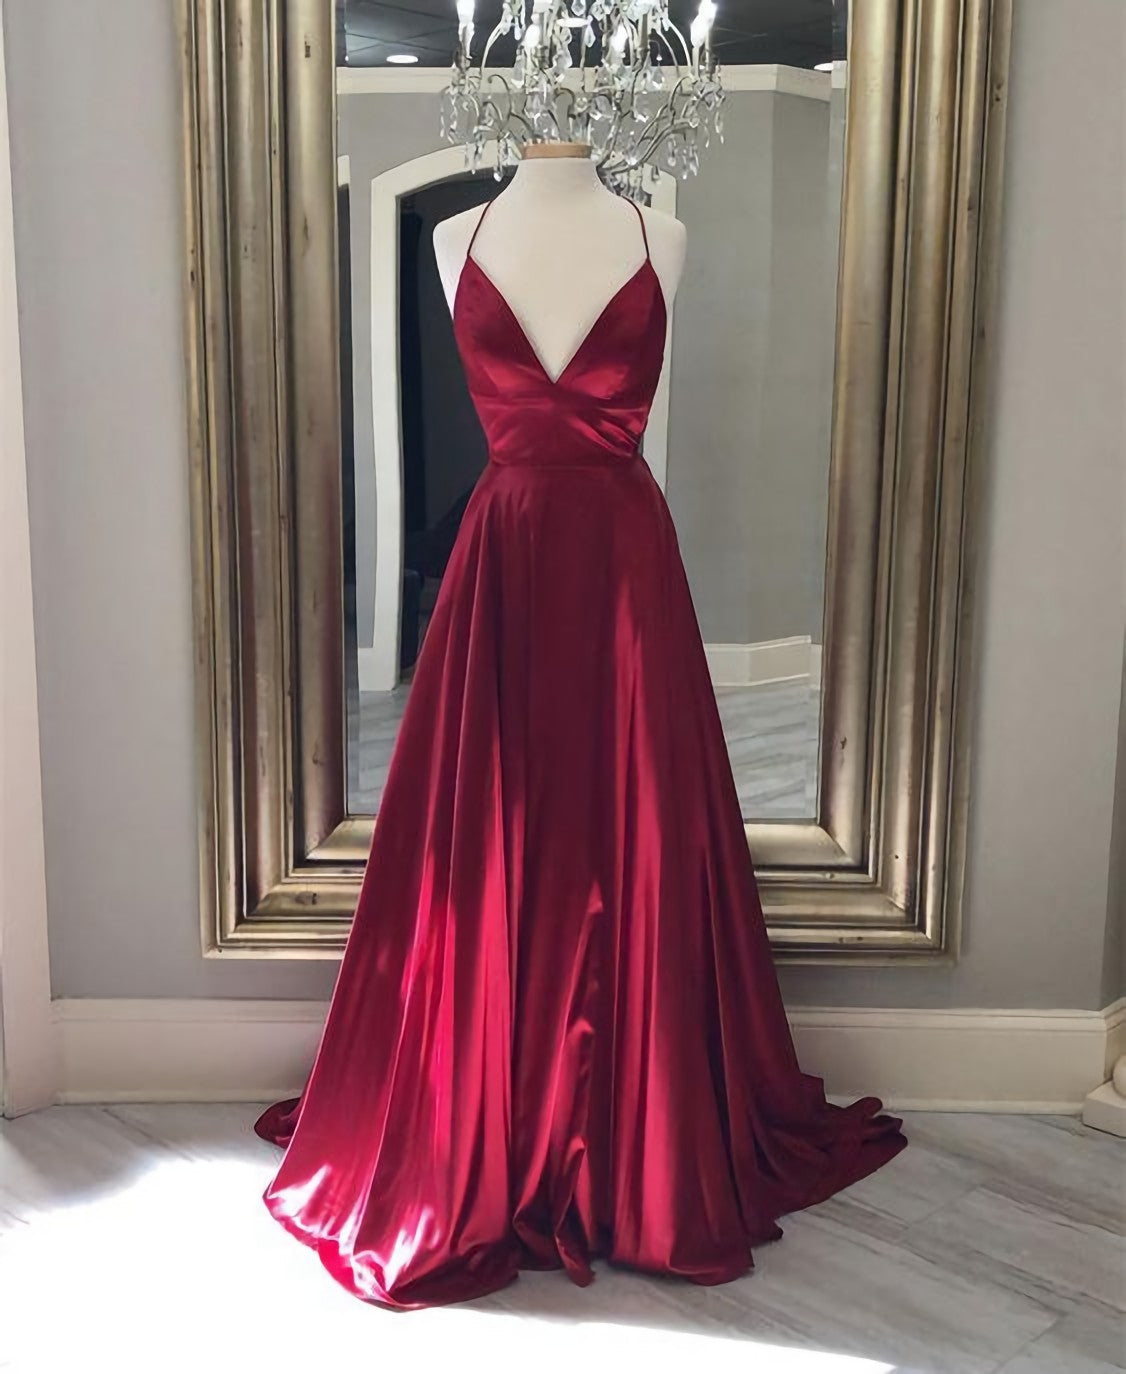 Spaghetti Straps Evening Gowns Dark Red Long Corset Prom Dresses outfit, Evening Dresses For Over 56S